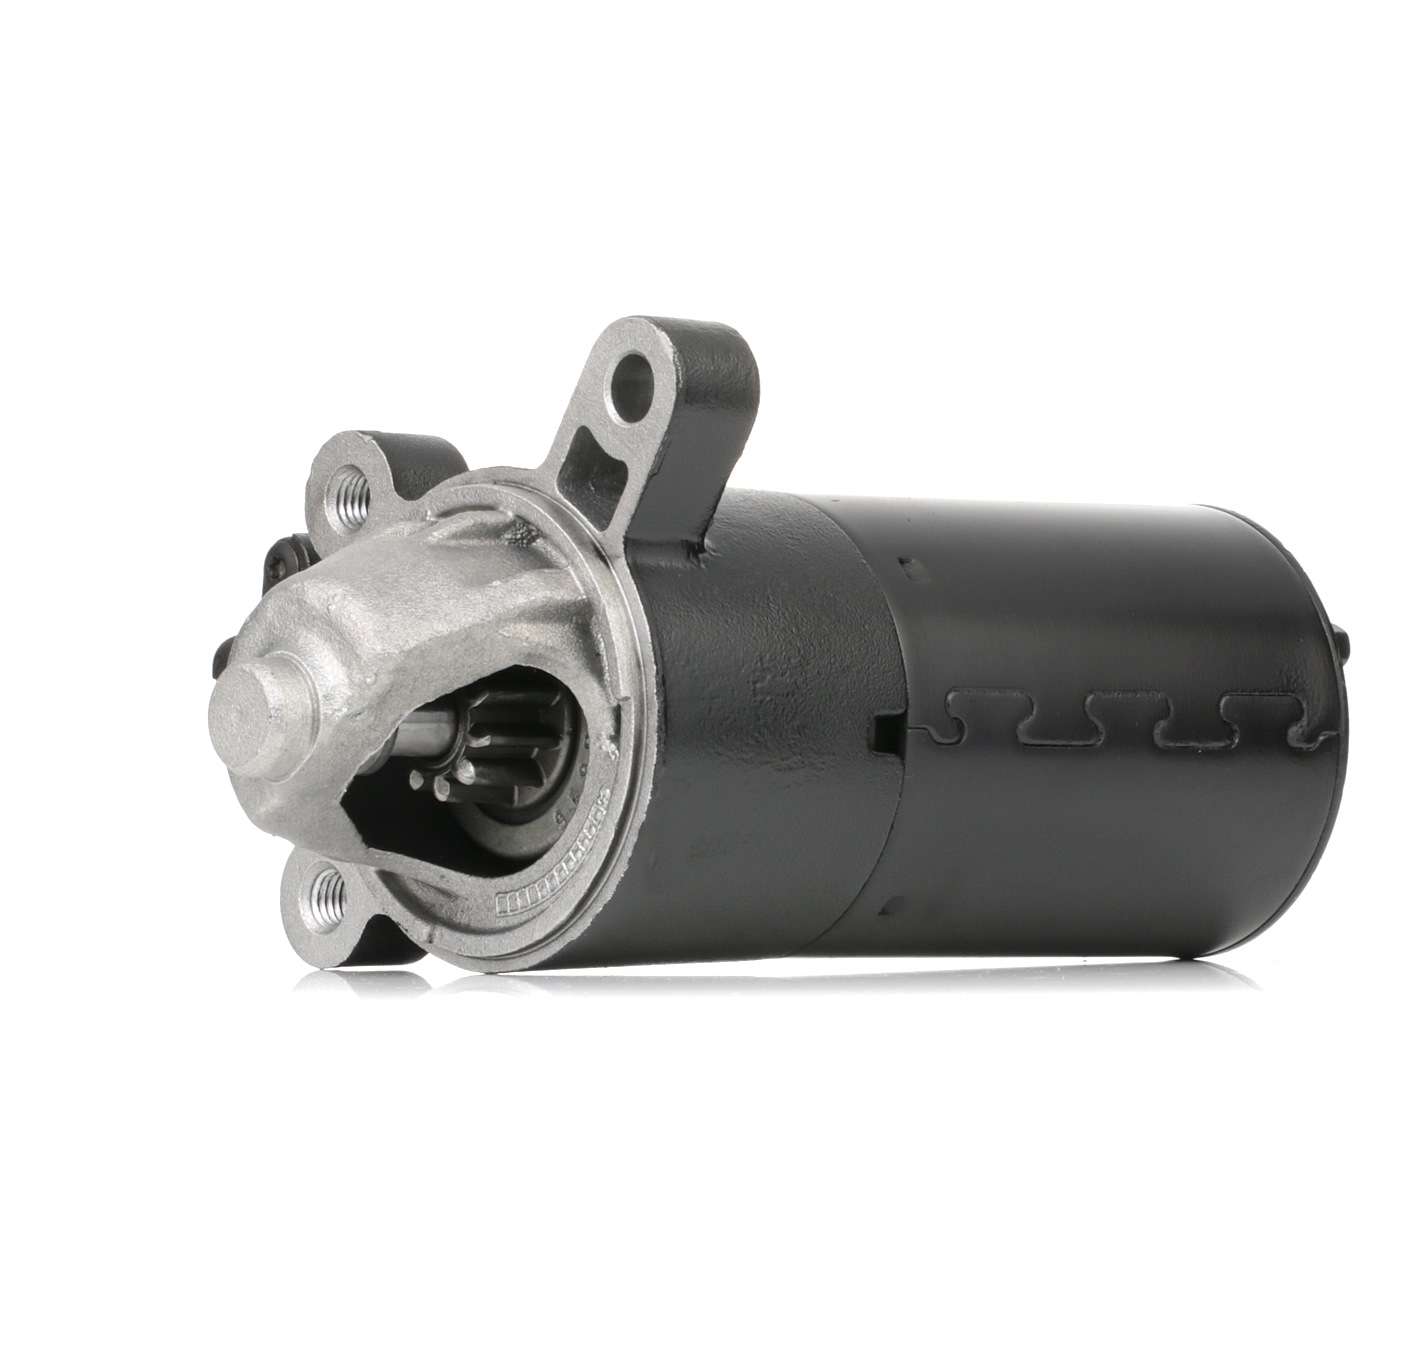 RIDEX REMAN 2S0212R Starter motor 12V, 1,4kW, Number of Teeth: 10, with 50(Jet) clamp, M8 B+, re 30, Ø 76 mm